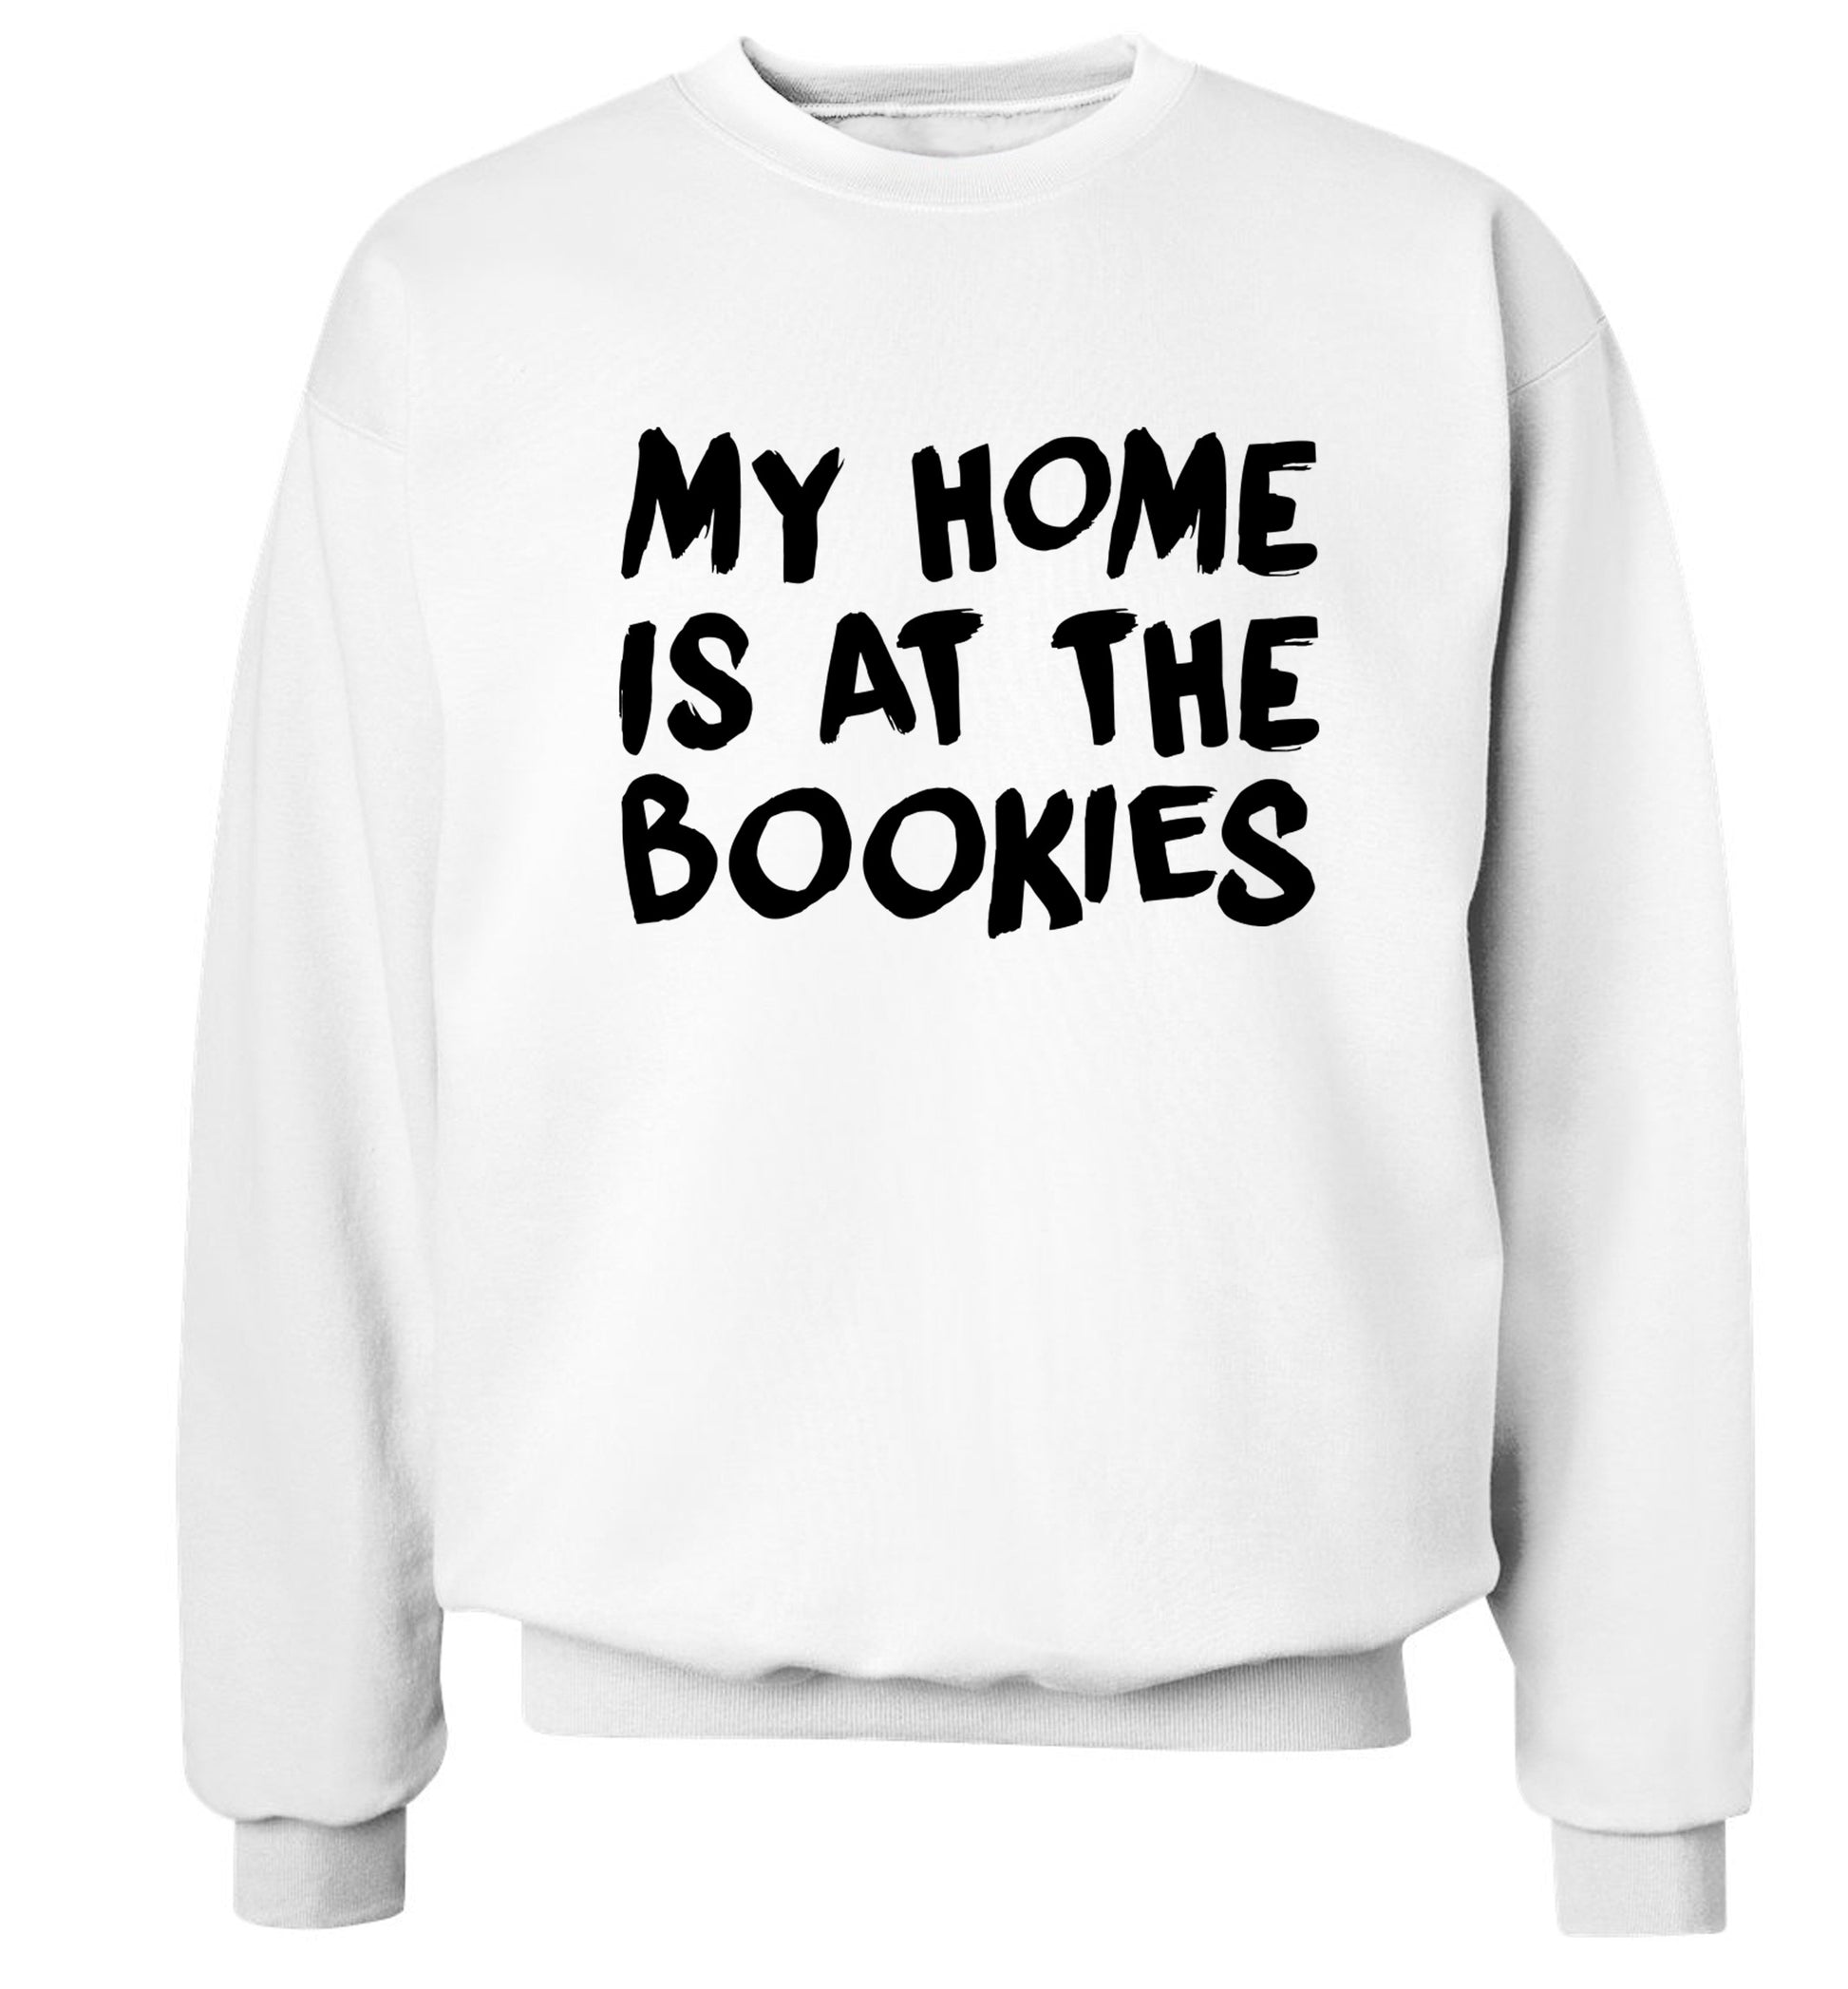 My home is at the bookies Adult's unisex white Sweater 2XL